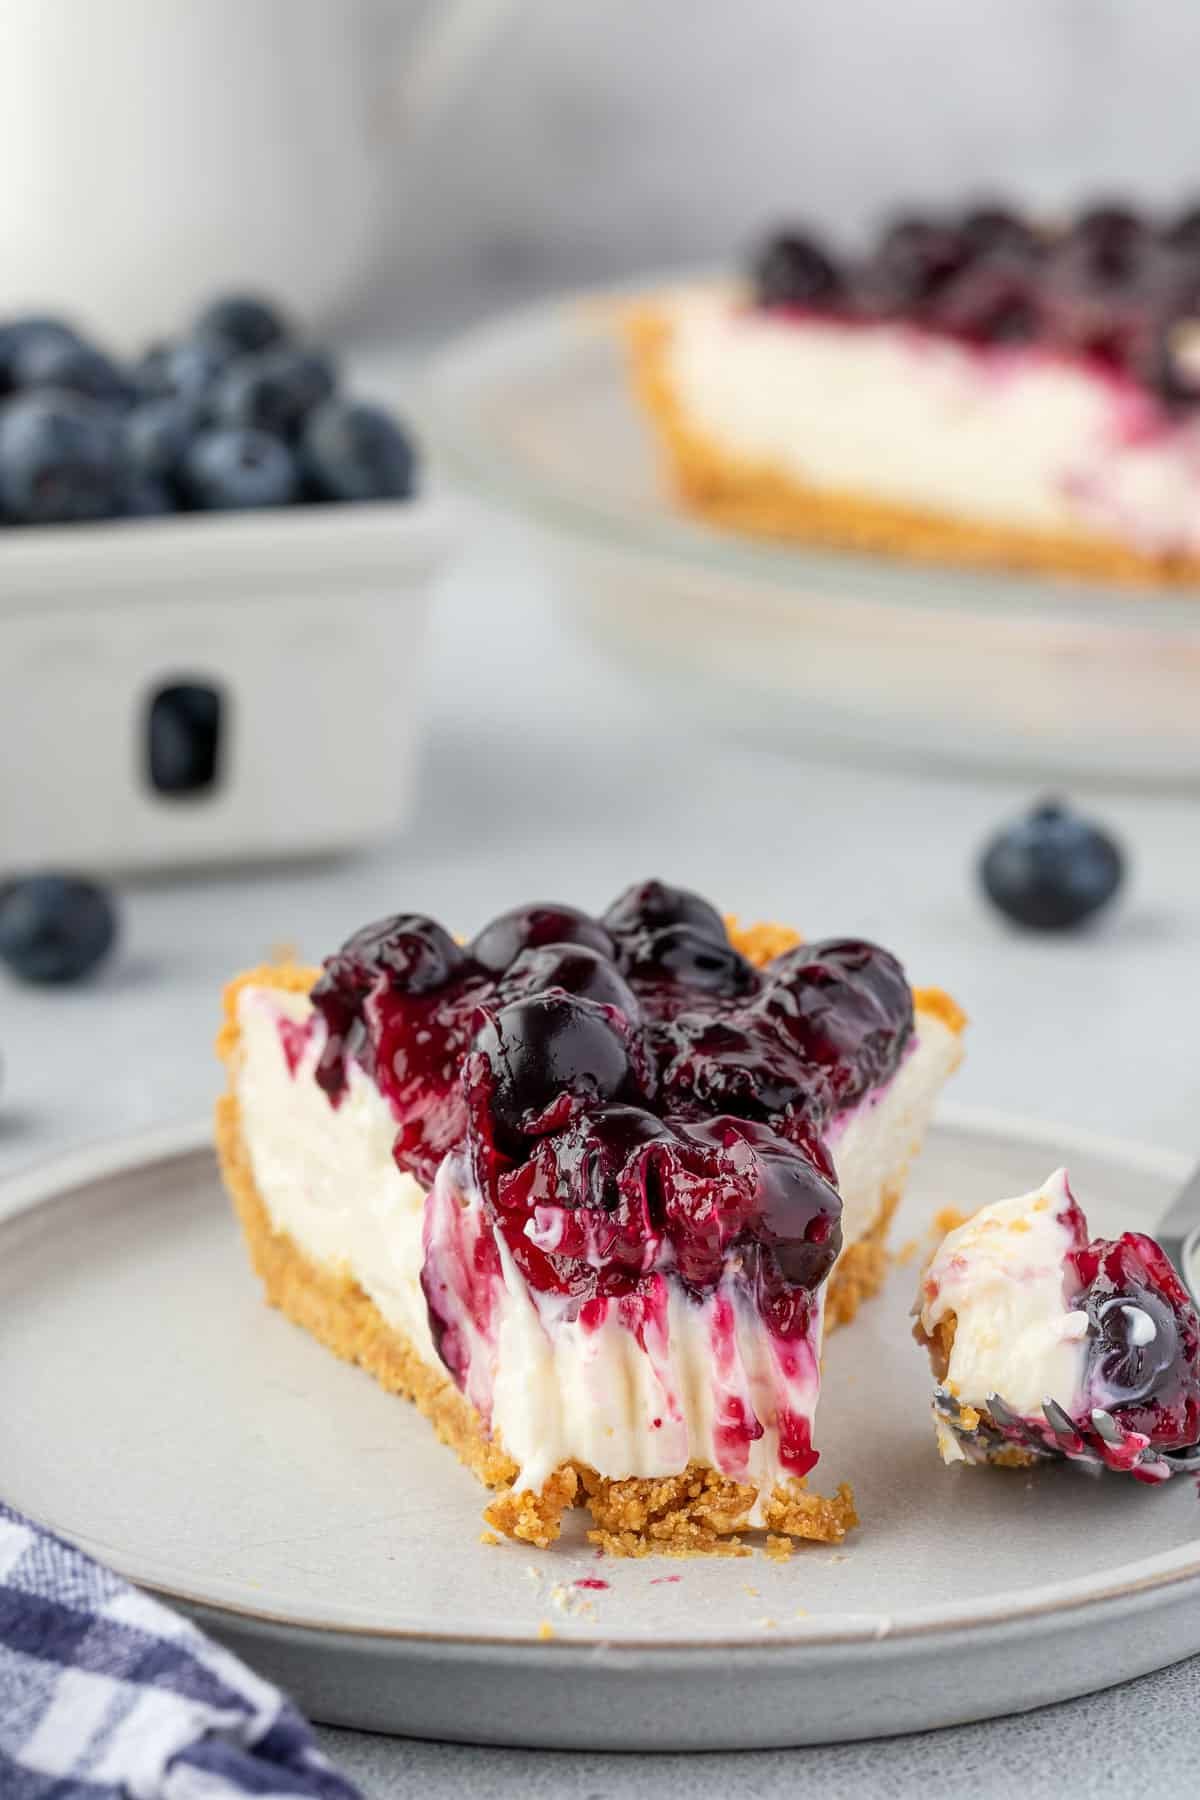 Slice of blueberry cream cheese pie on a plate with a bite on a fork, and a ceramic basket filled with blueberries.